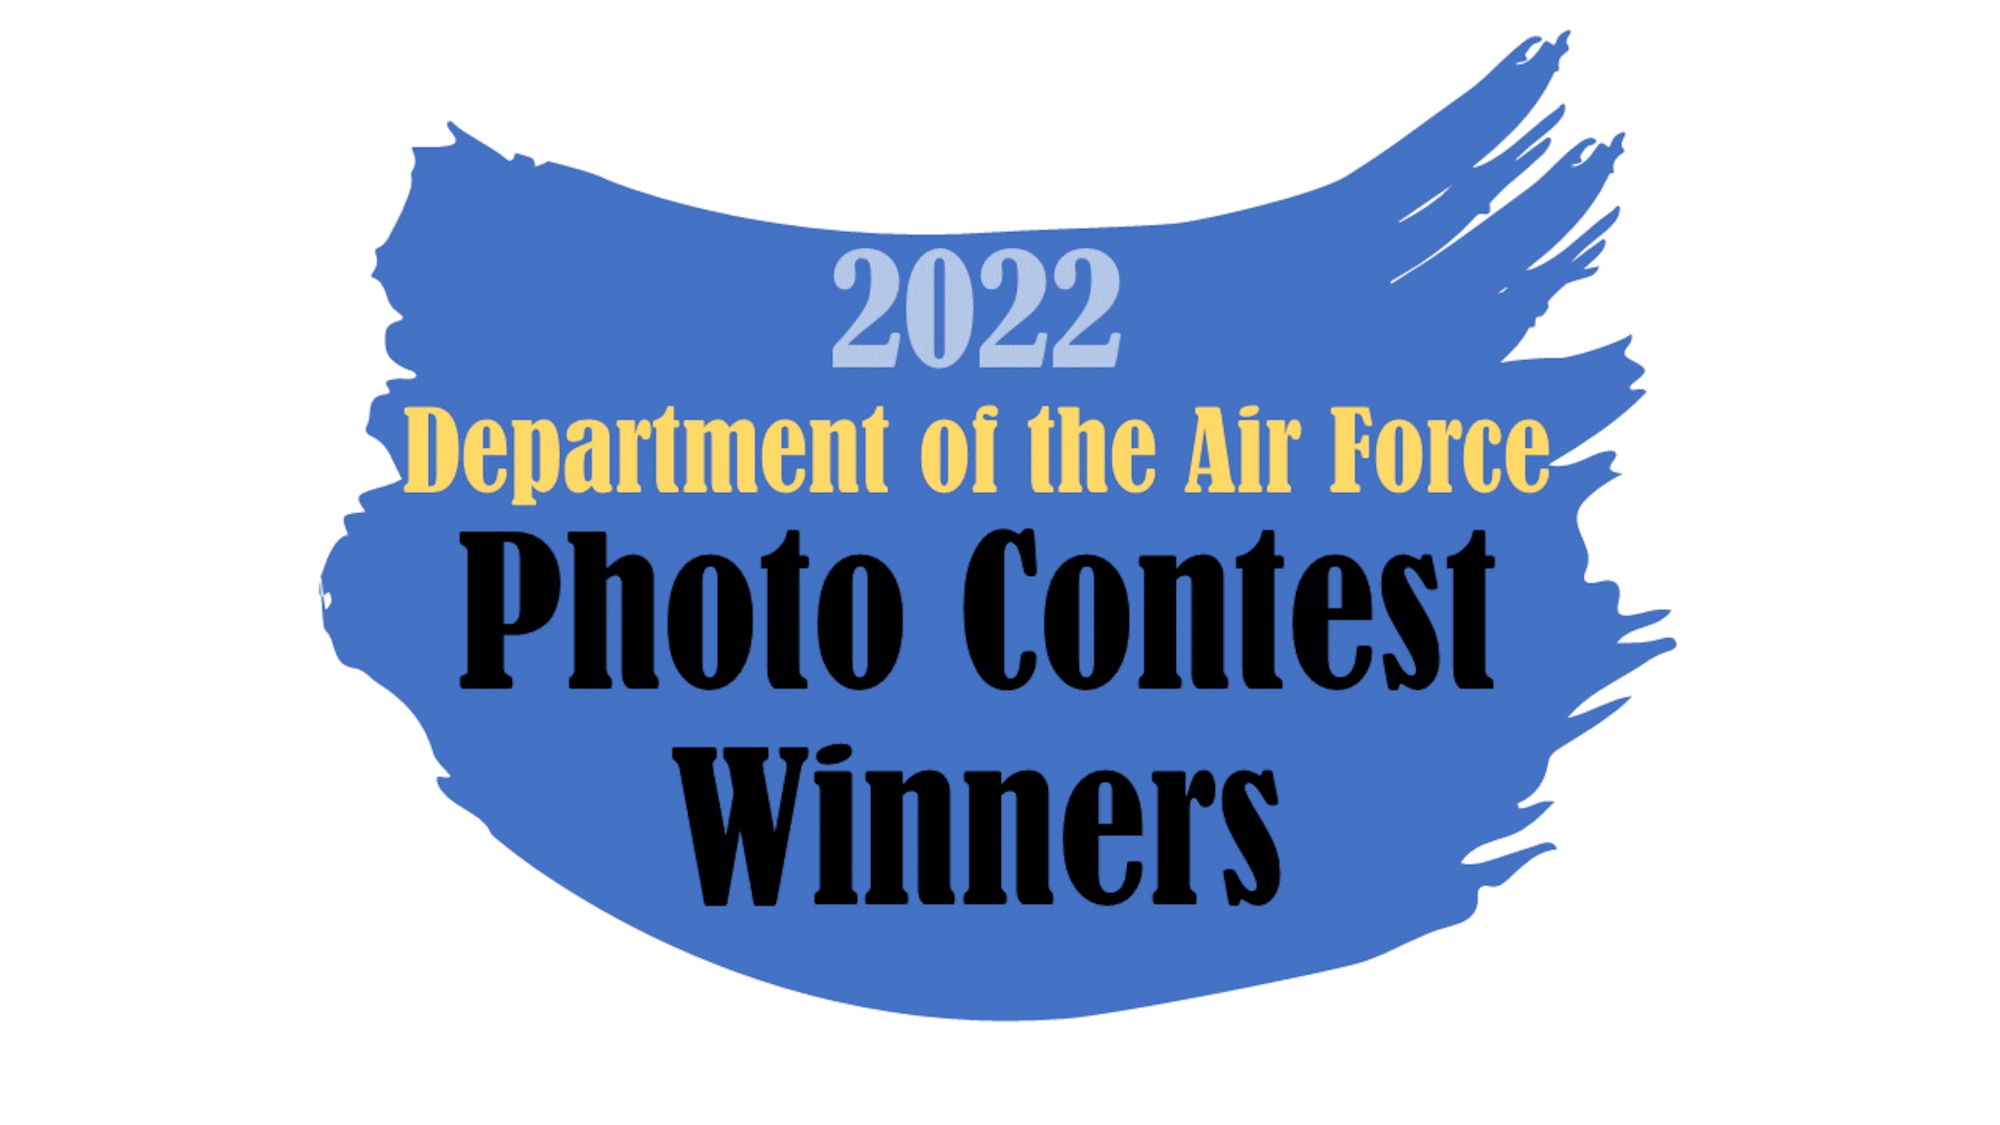 DAF announces 2022 Photo Contest winners > Air Force > Article Display